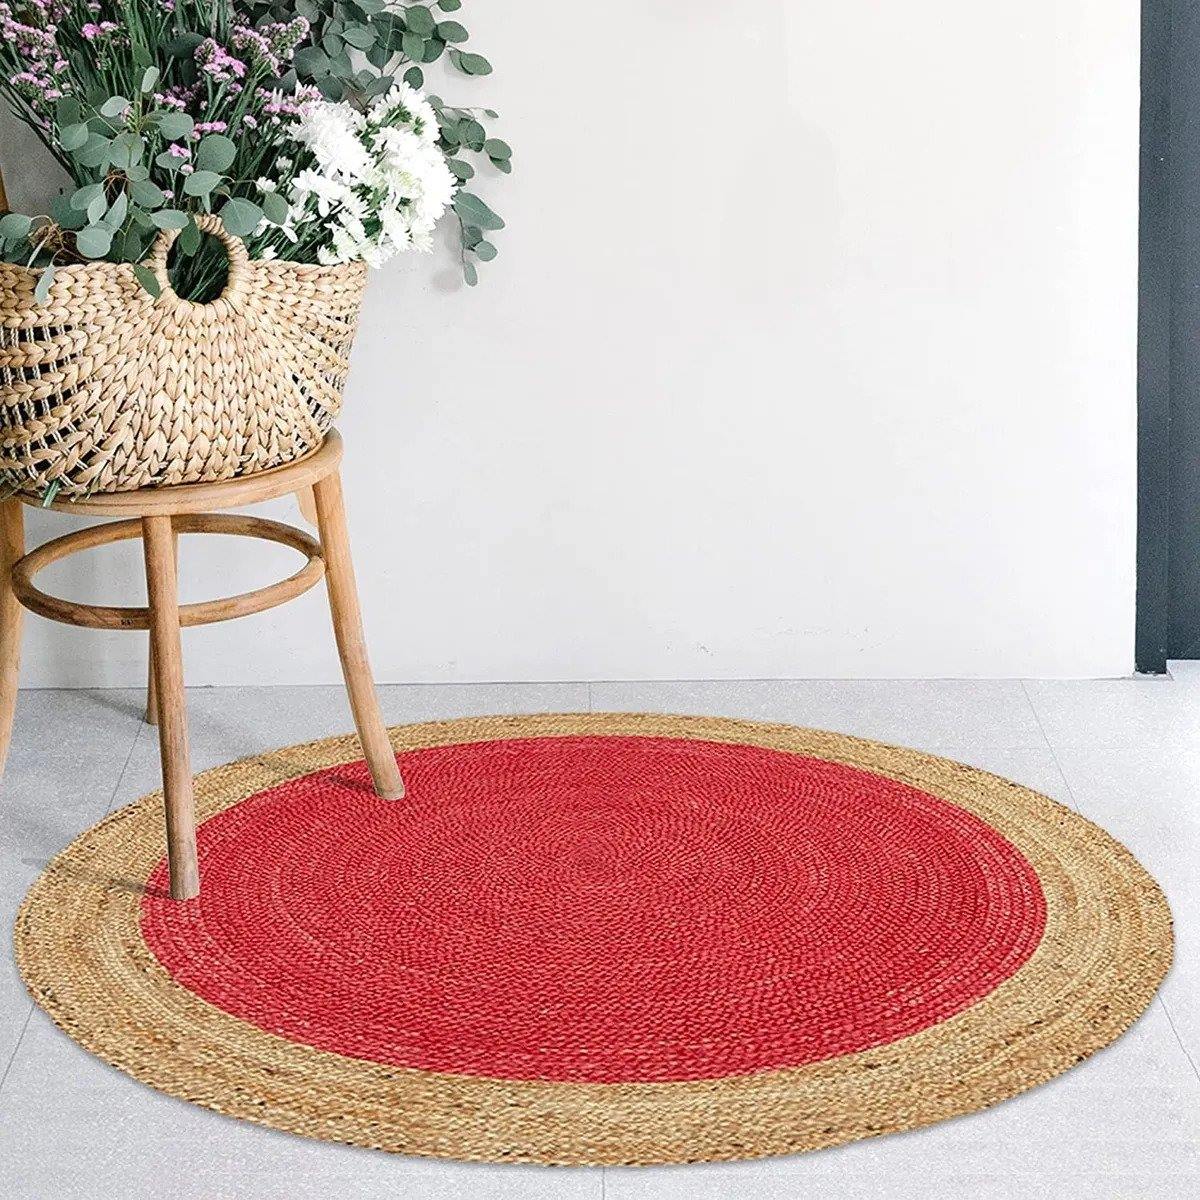 How To Wash Braided Rugs